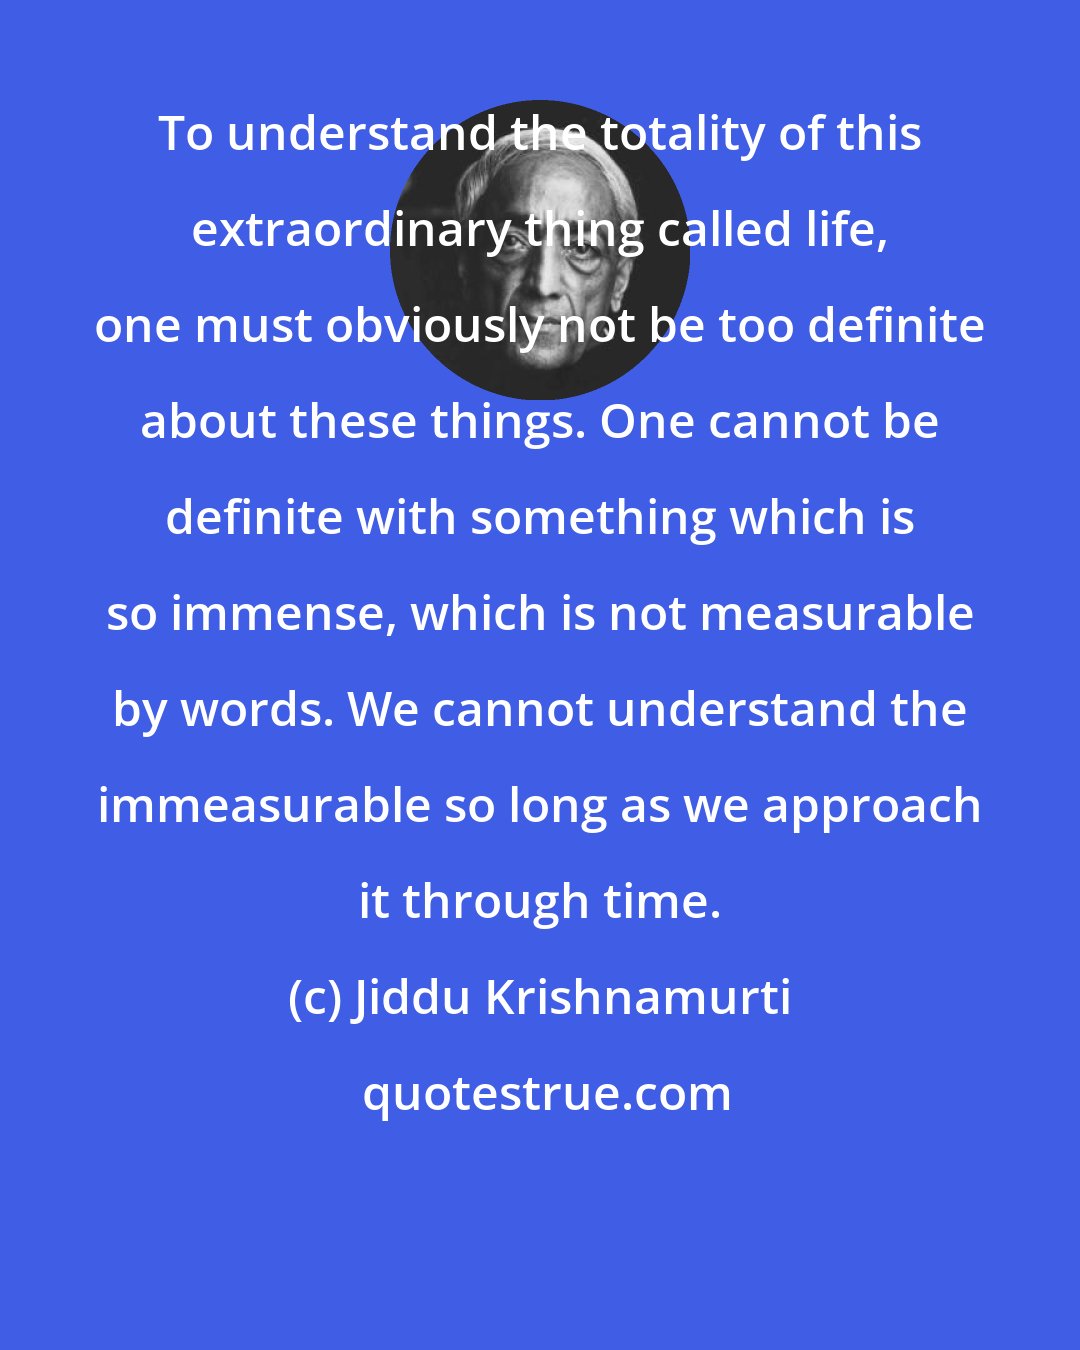 Jiddu Krishnamurti: To understand the totality of this extraordinary thing called life, one must obviously not be too definite about these things. One cannot be definite with something which is so immense, which is not measurable by words. We cannot understand the immeasurable so long as we approach it through time.